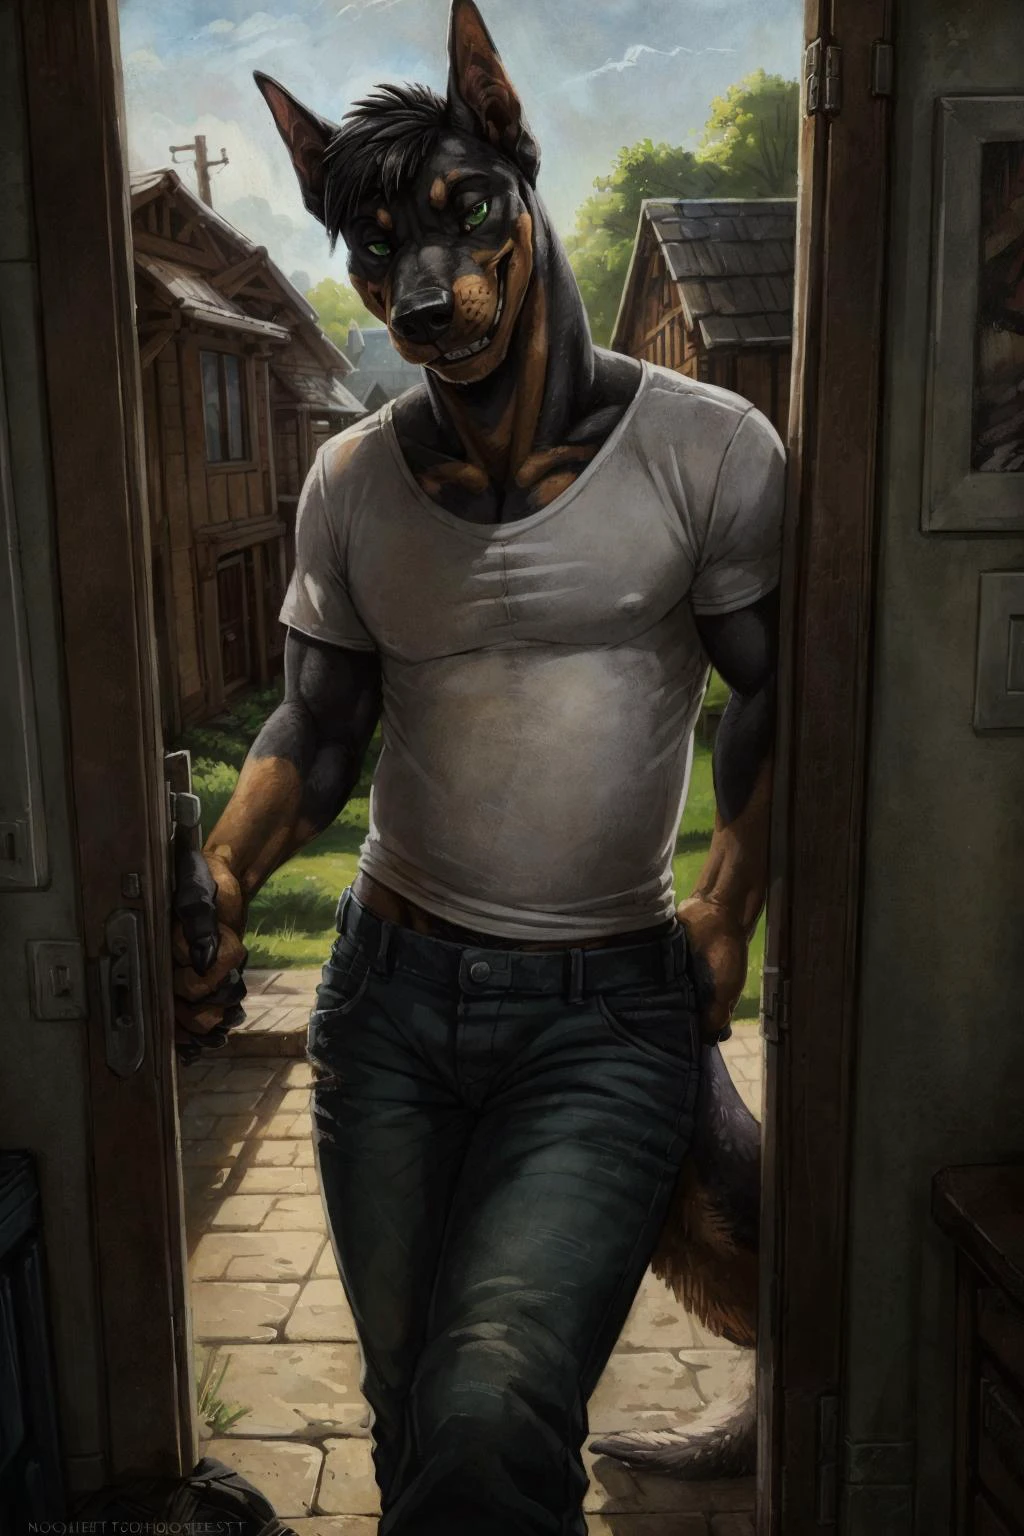 uploaded on e621, (by tojo the thief, by narse, by wfa, by RrowdyBeast, by Kenket), HDR, masterpiece, tall strong muscular ((green eyed anthro dobermann-wolf hybrid male with short black hair dressed in white t-short and black jeans)) standing in the doorway, human female viewer's perspetive, pov, human female viewer's hand holding the door, (toothy grin), ((bedroom_eyes,)) view from indoors to outdoors, town background, at day, (may_I_come_in?), (looking at the viewer):0.67, intricate details, hyperdetailed, 8k uhd, one_frame_image